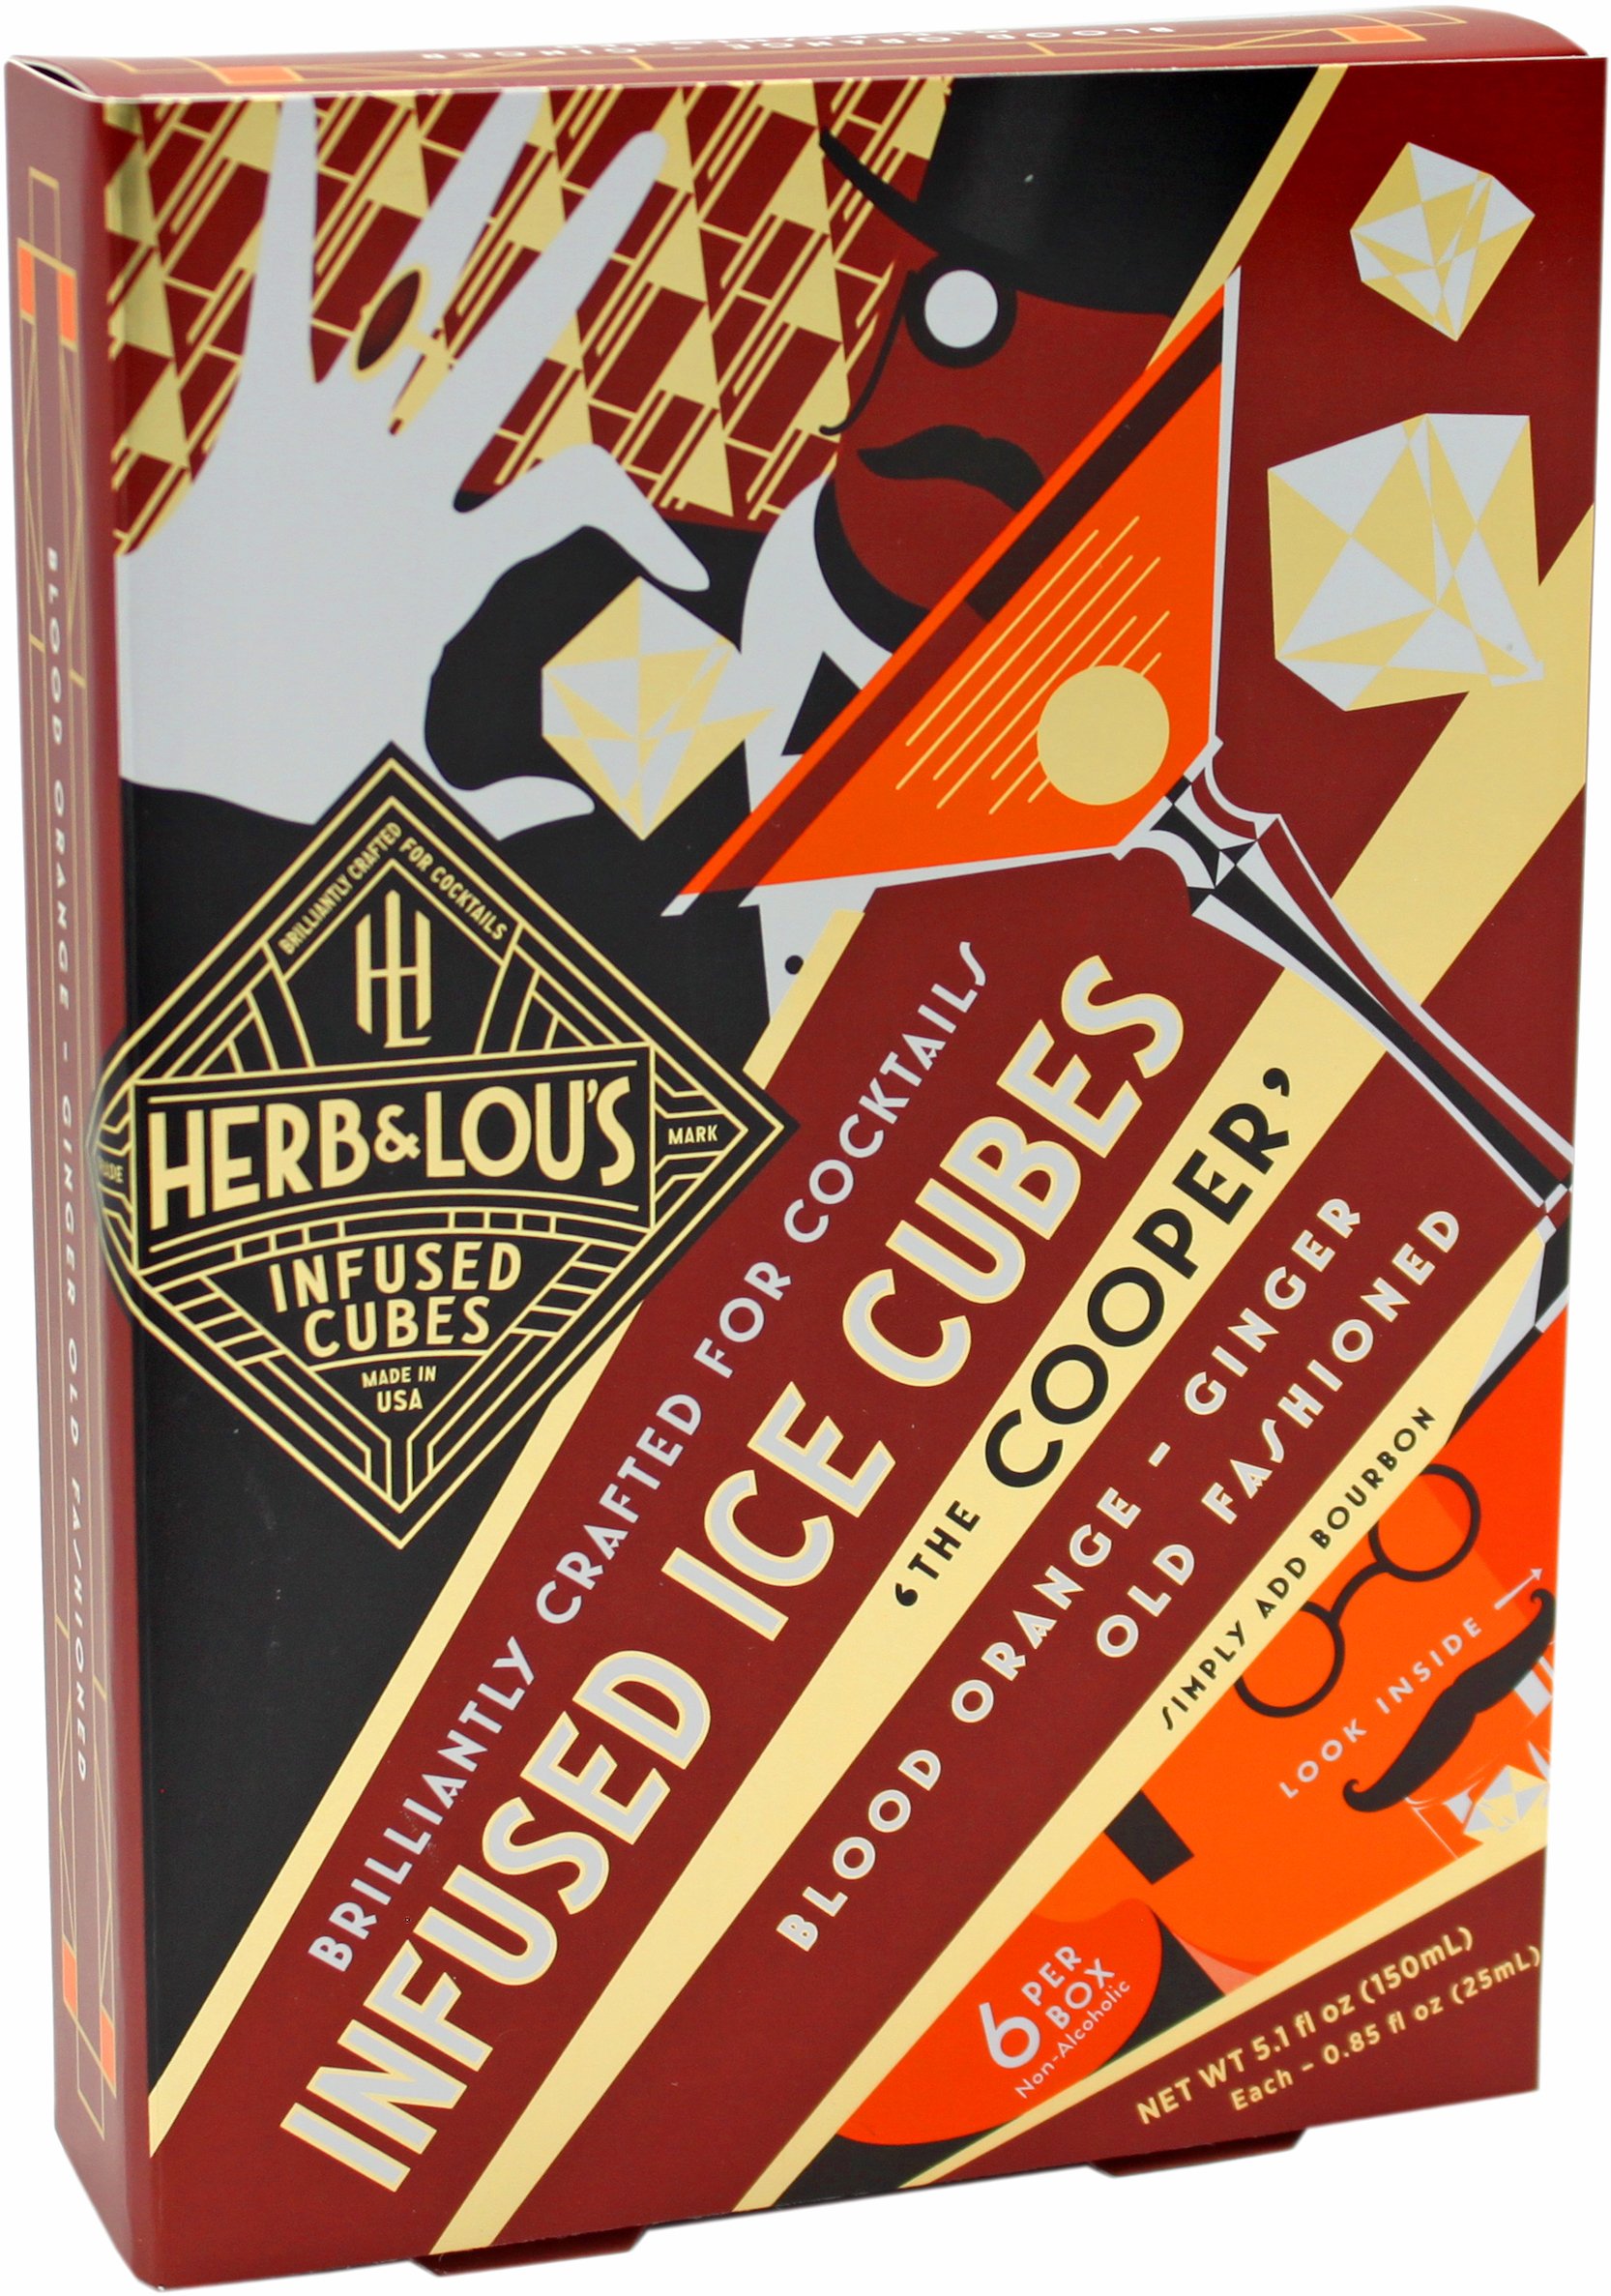  Herb & Lou's Infused Cubes Cocktail Mixers - The Cooper,  Simply Add Bourbon or Rye, Blood Orange-Ginger Old Fashioned, Non-Alcoholic Infused  Ice Cubes, Made in the USA - 12-Cube Pack 